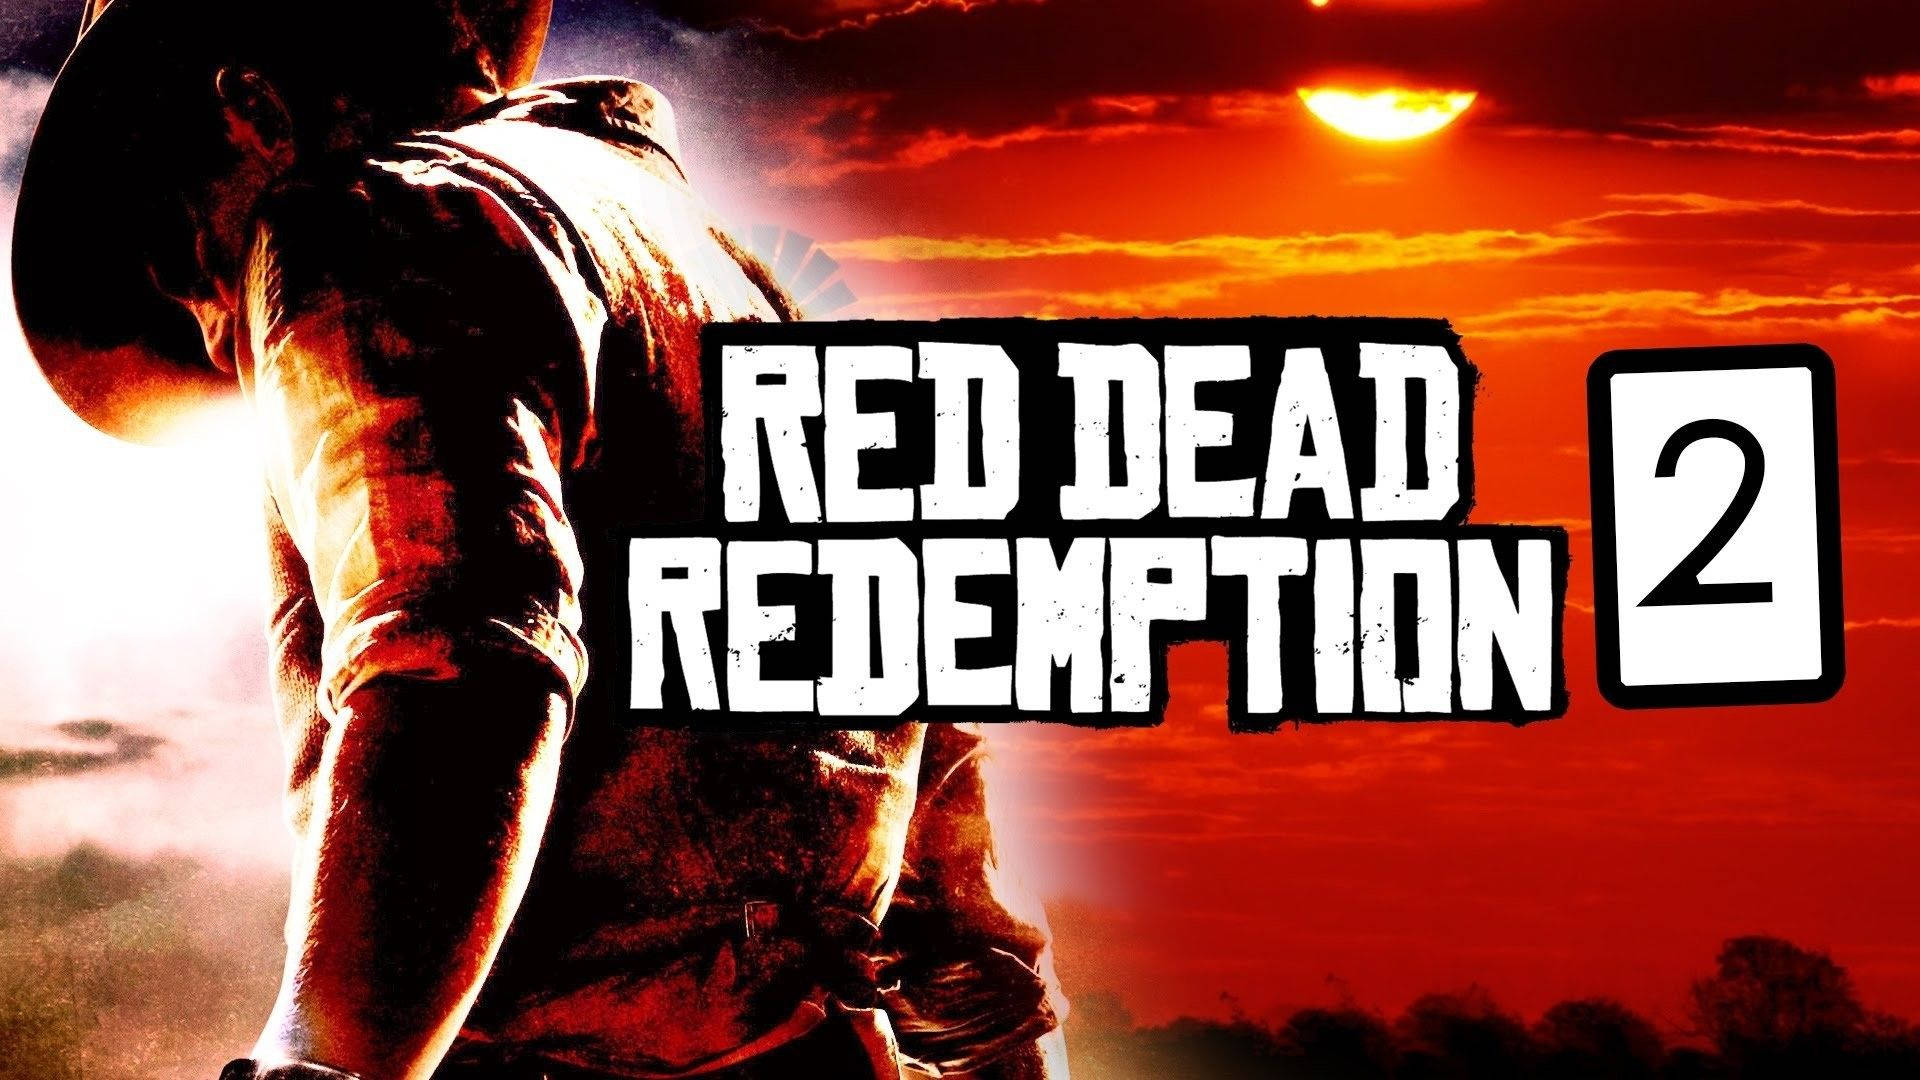 Red Dead Redemption Wallpaper Background Picture